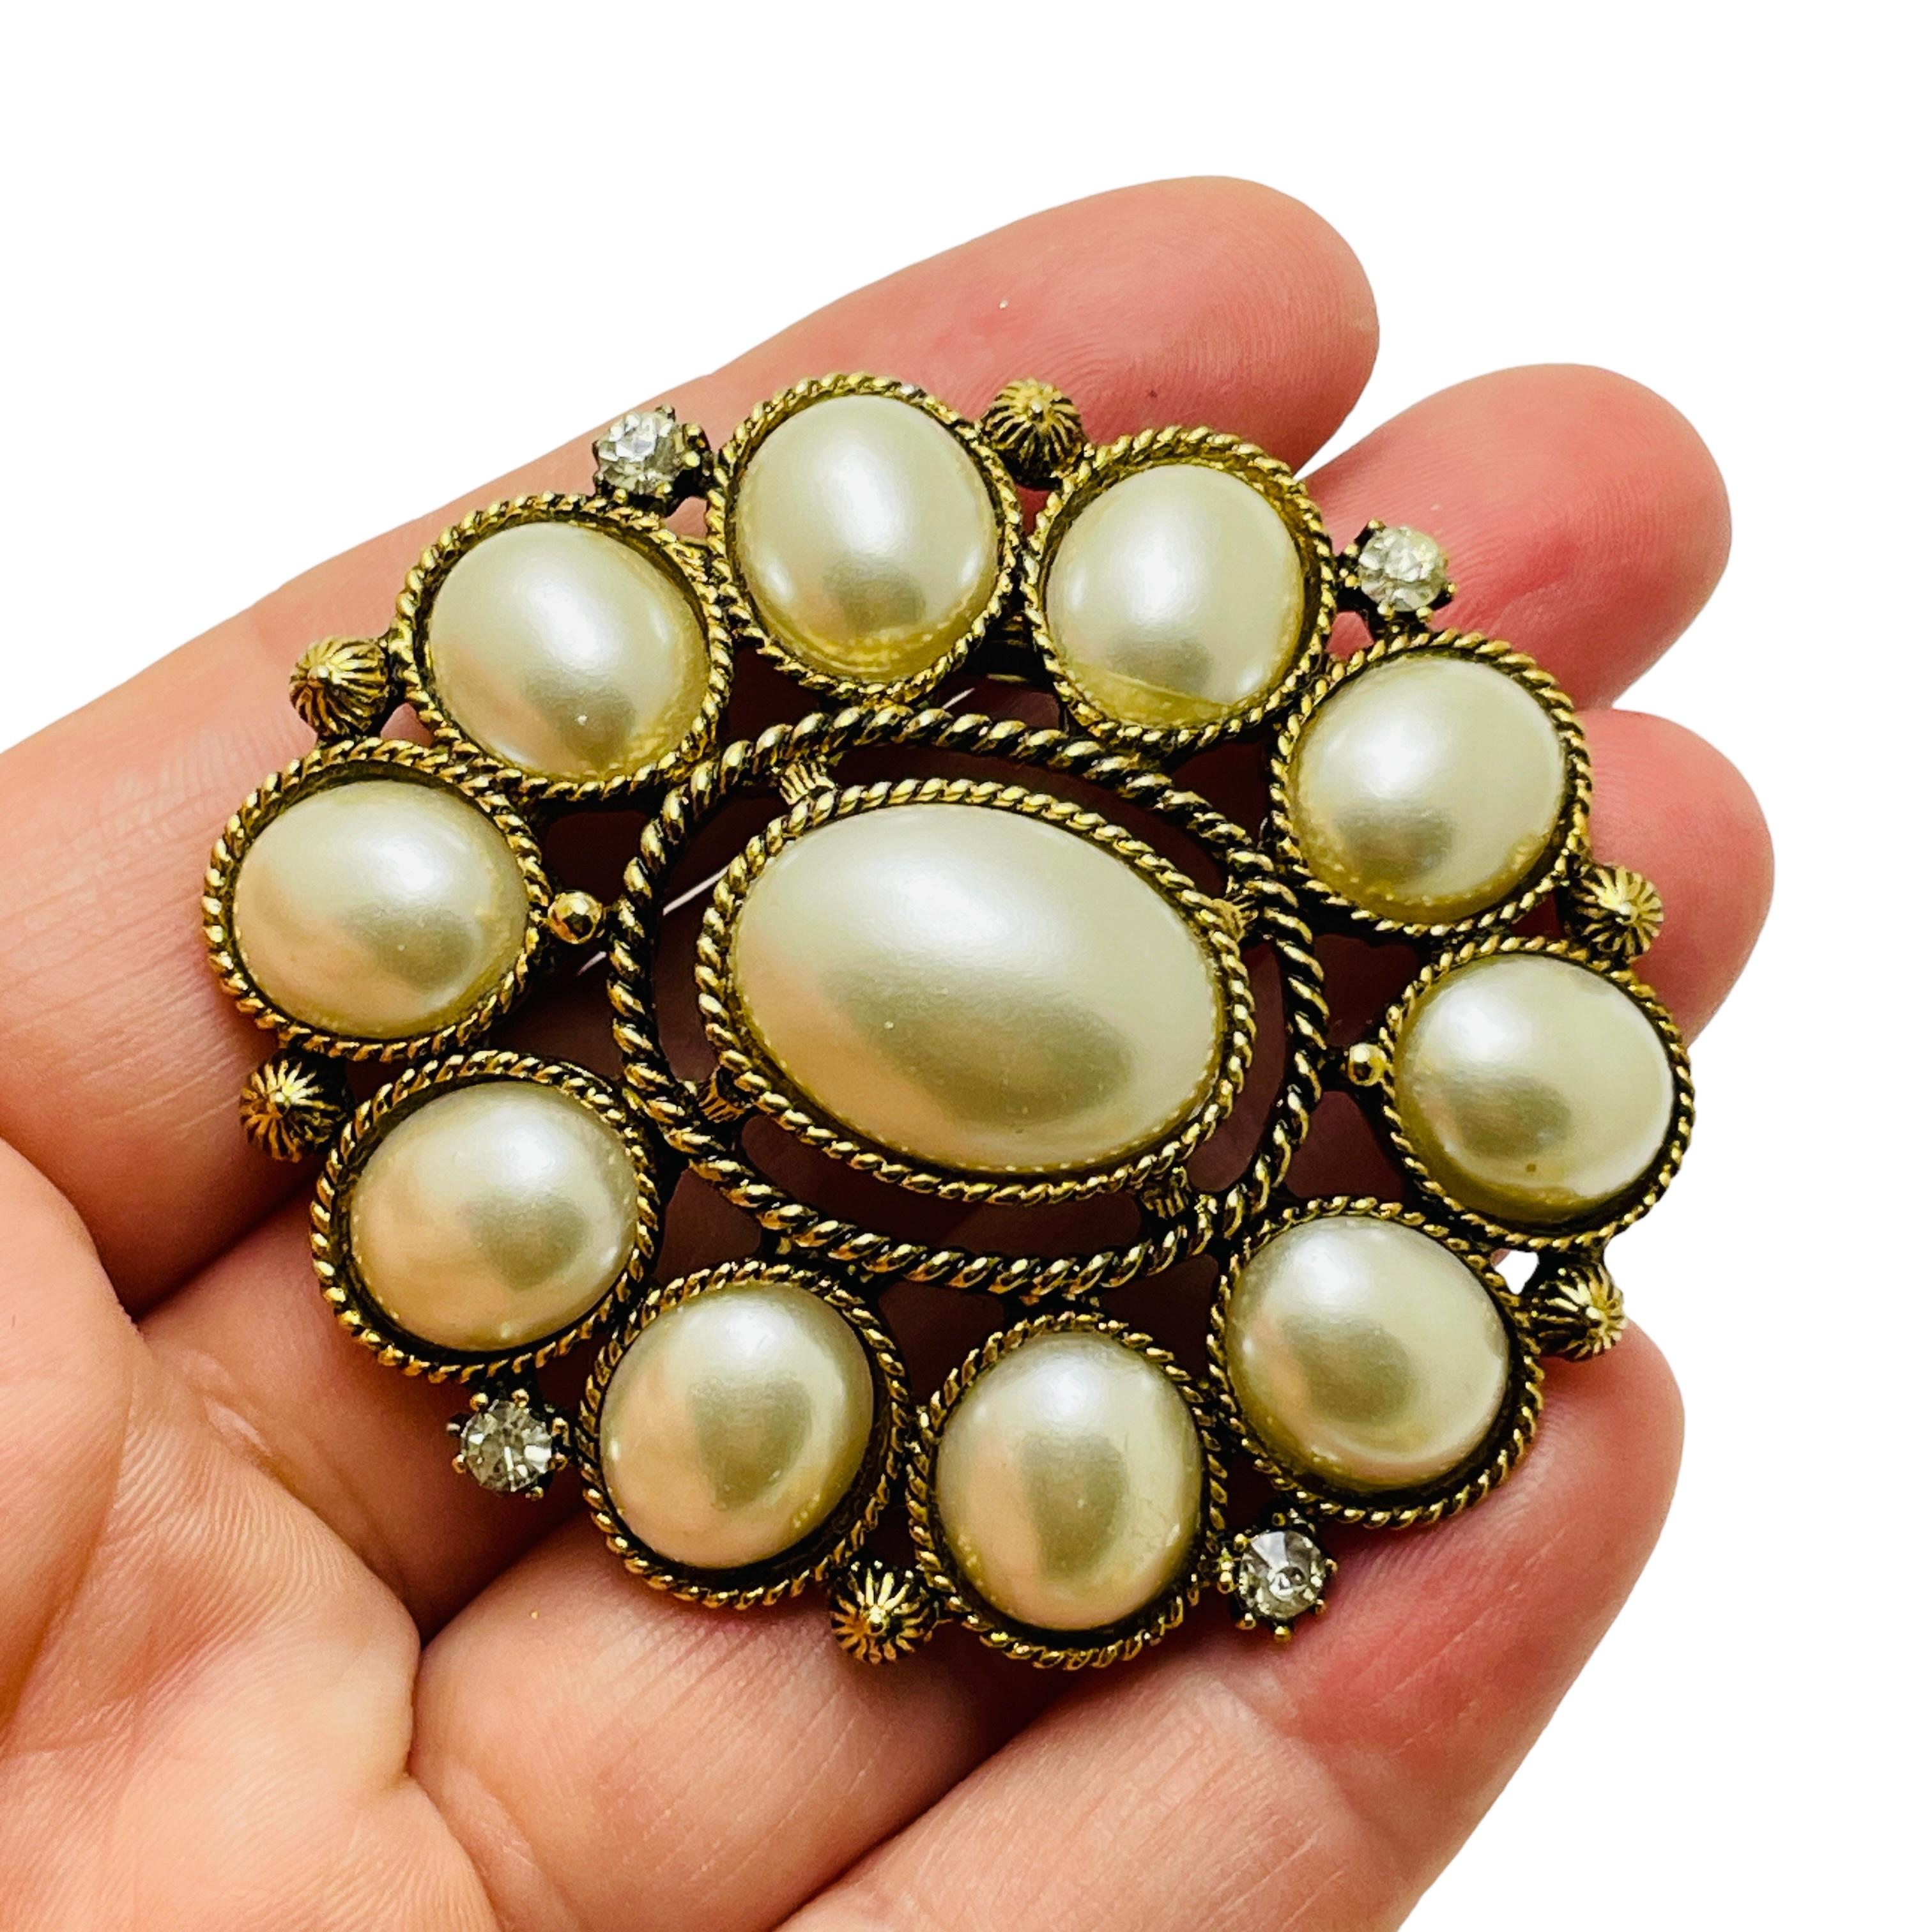 DETAILS

• unsigned

• gold tone with faux pearl and rhinestones

• vintage designer runway brooch

MEASUREMENTS

• 

CONDITION

• excellent vintage condition with minimal signs of wear

❤️❤️ VINTAGE DESIGNER JEWELRY ❤️❤️
❤️❤️ ALEXANDER'S BOUTIQUE